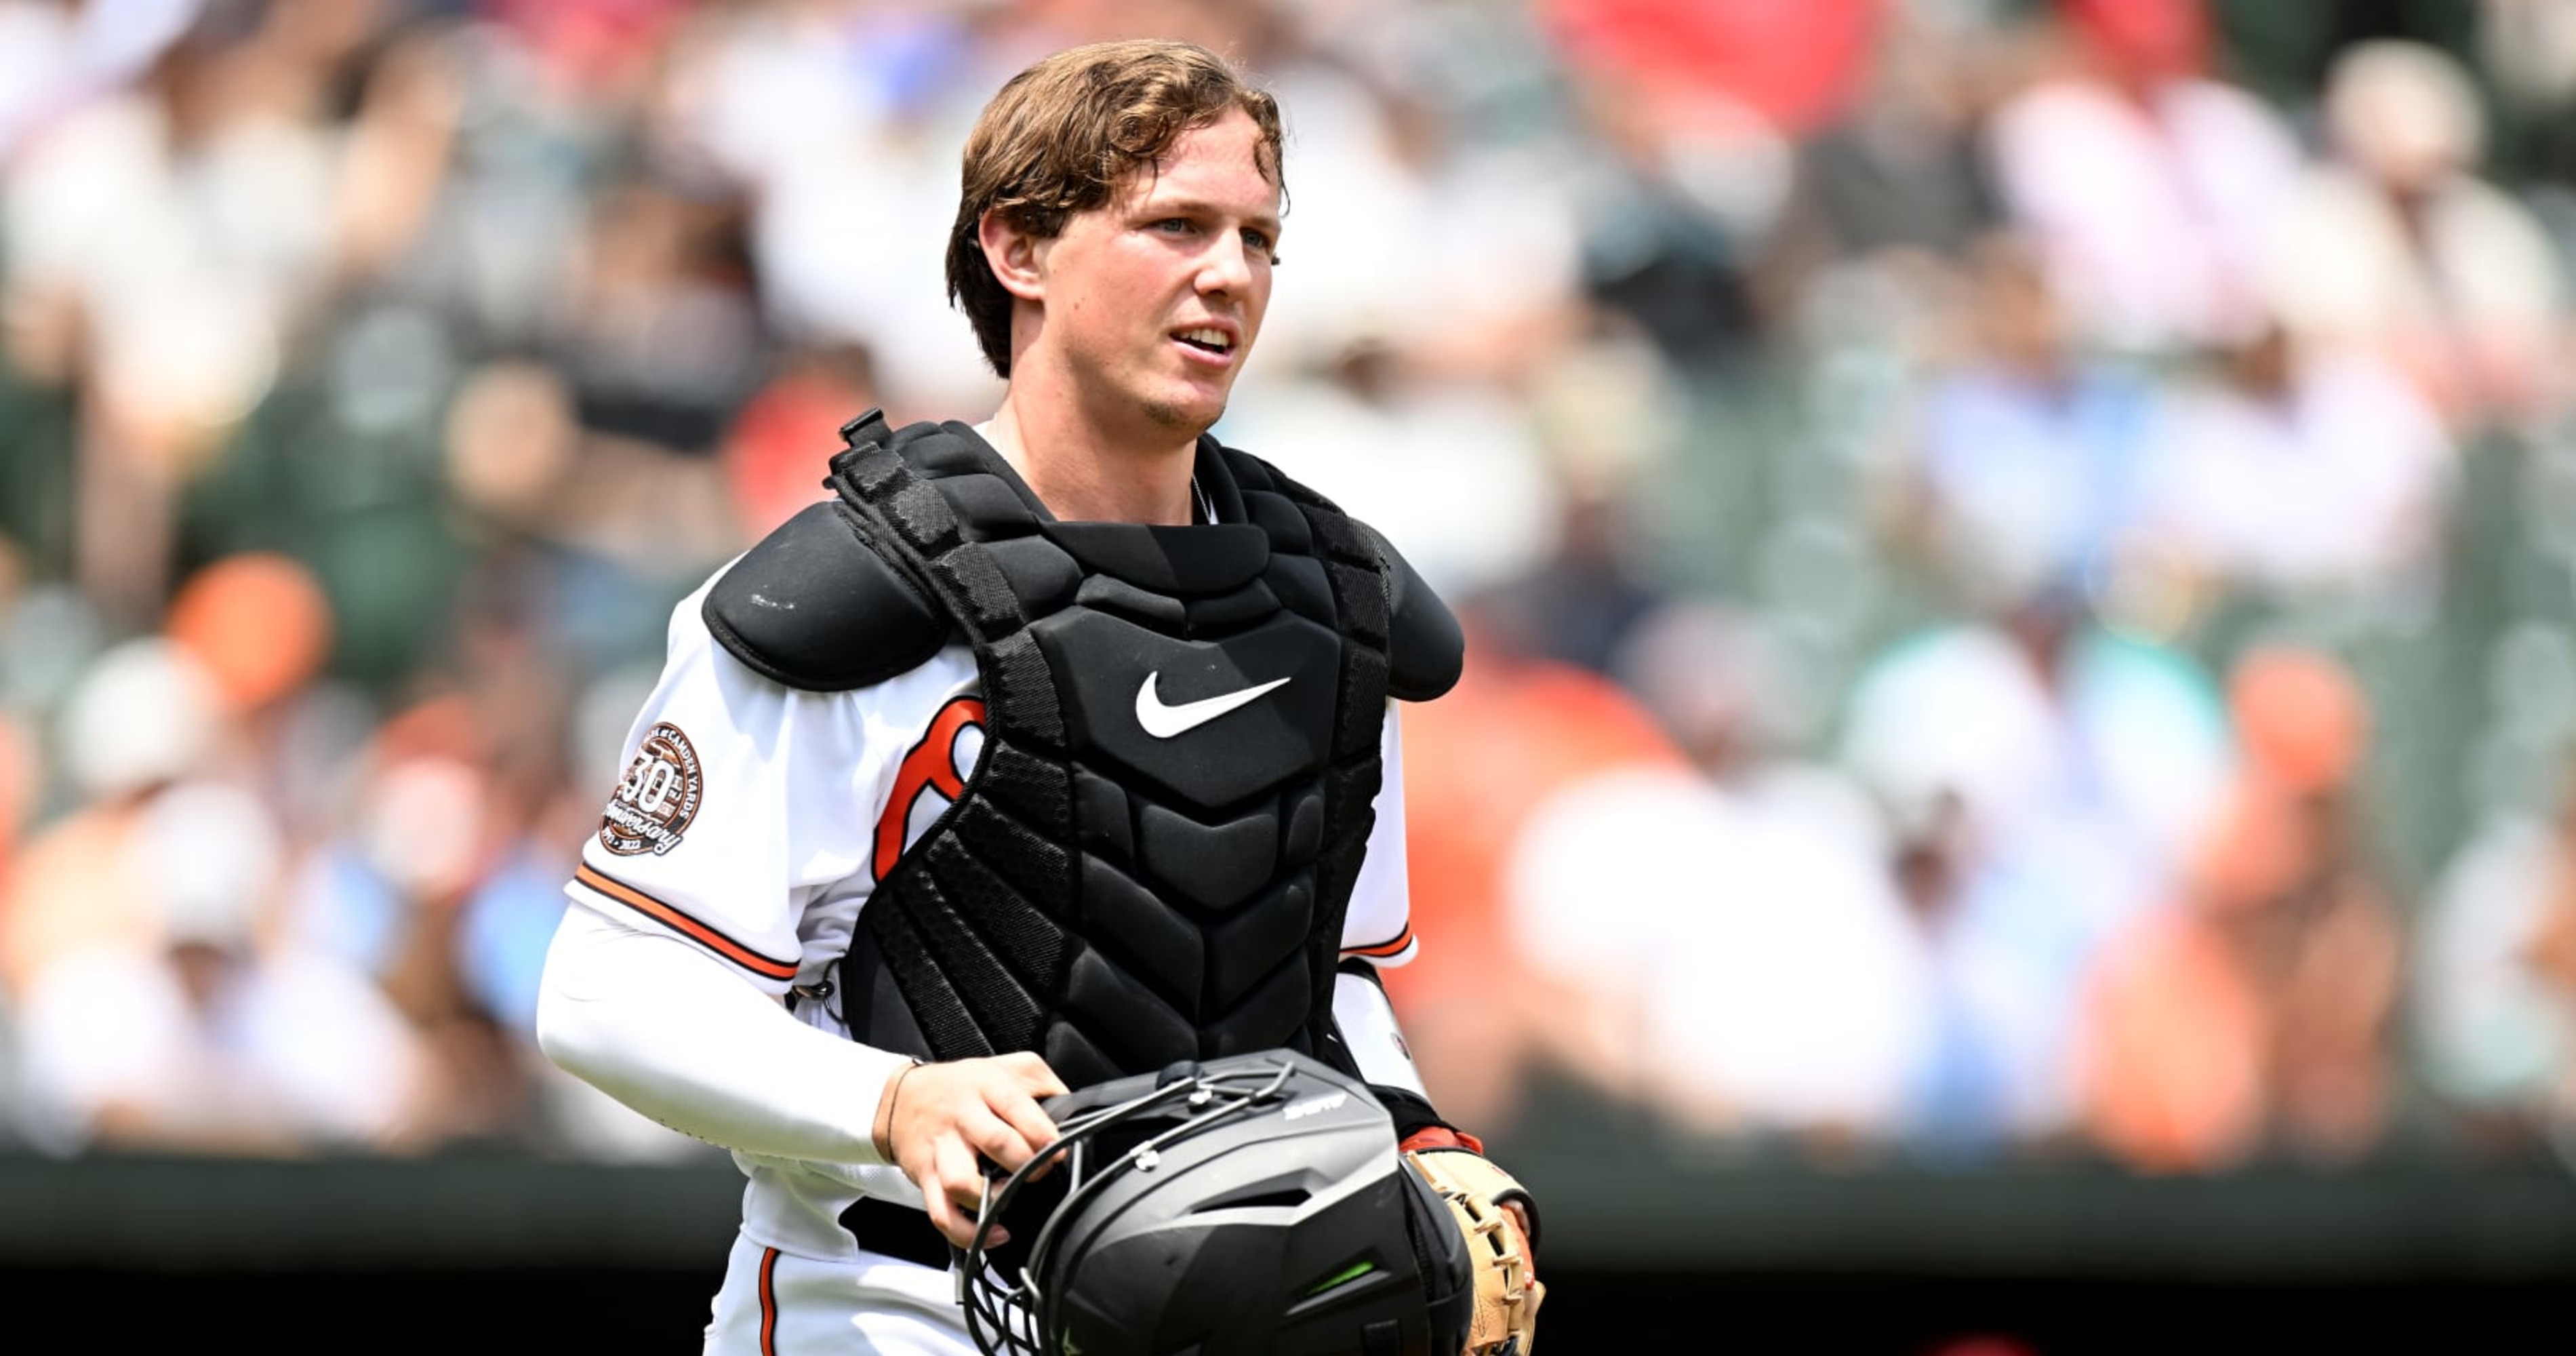 Orioles' Adley Rutschman Is Living Up to the Hype as MLB's Next Great Catcher